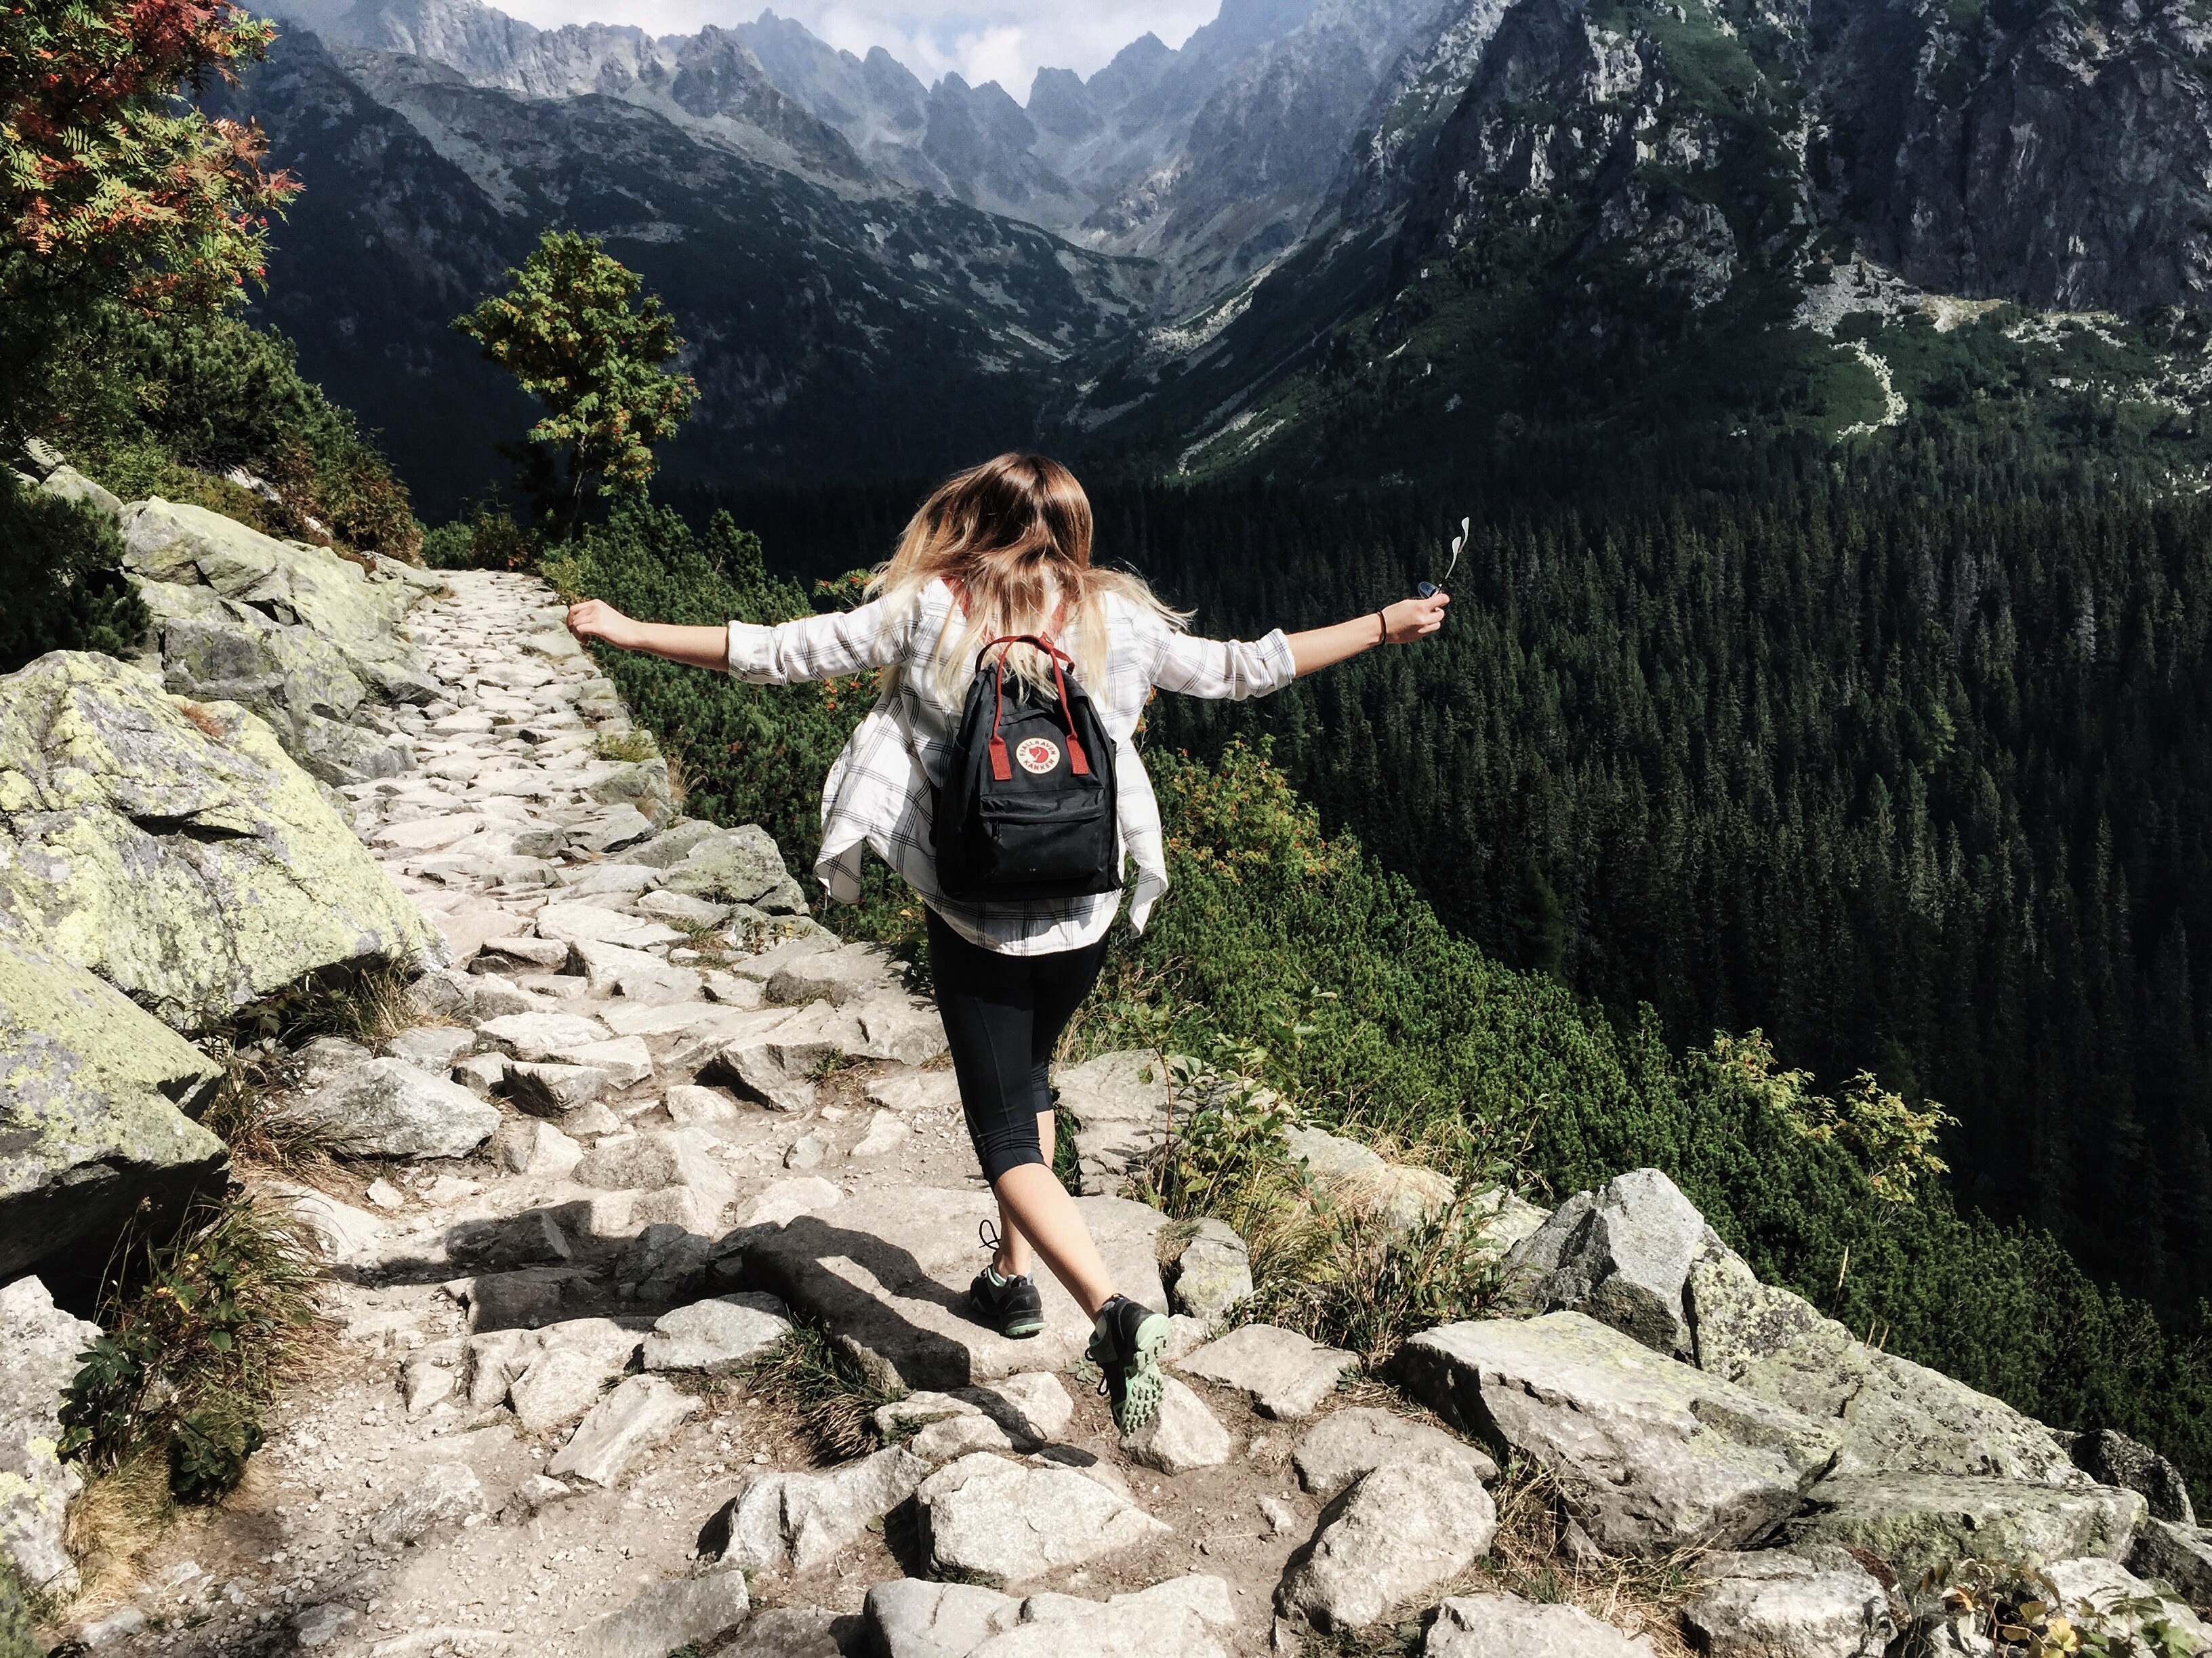 Image: Young Woman hiking in mountains